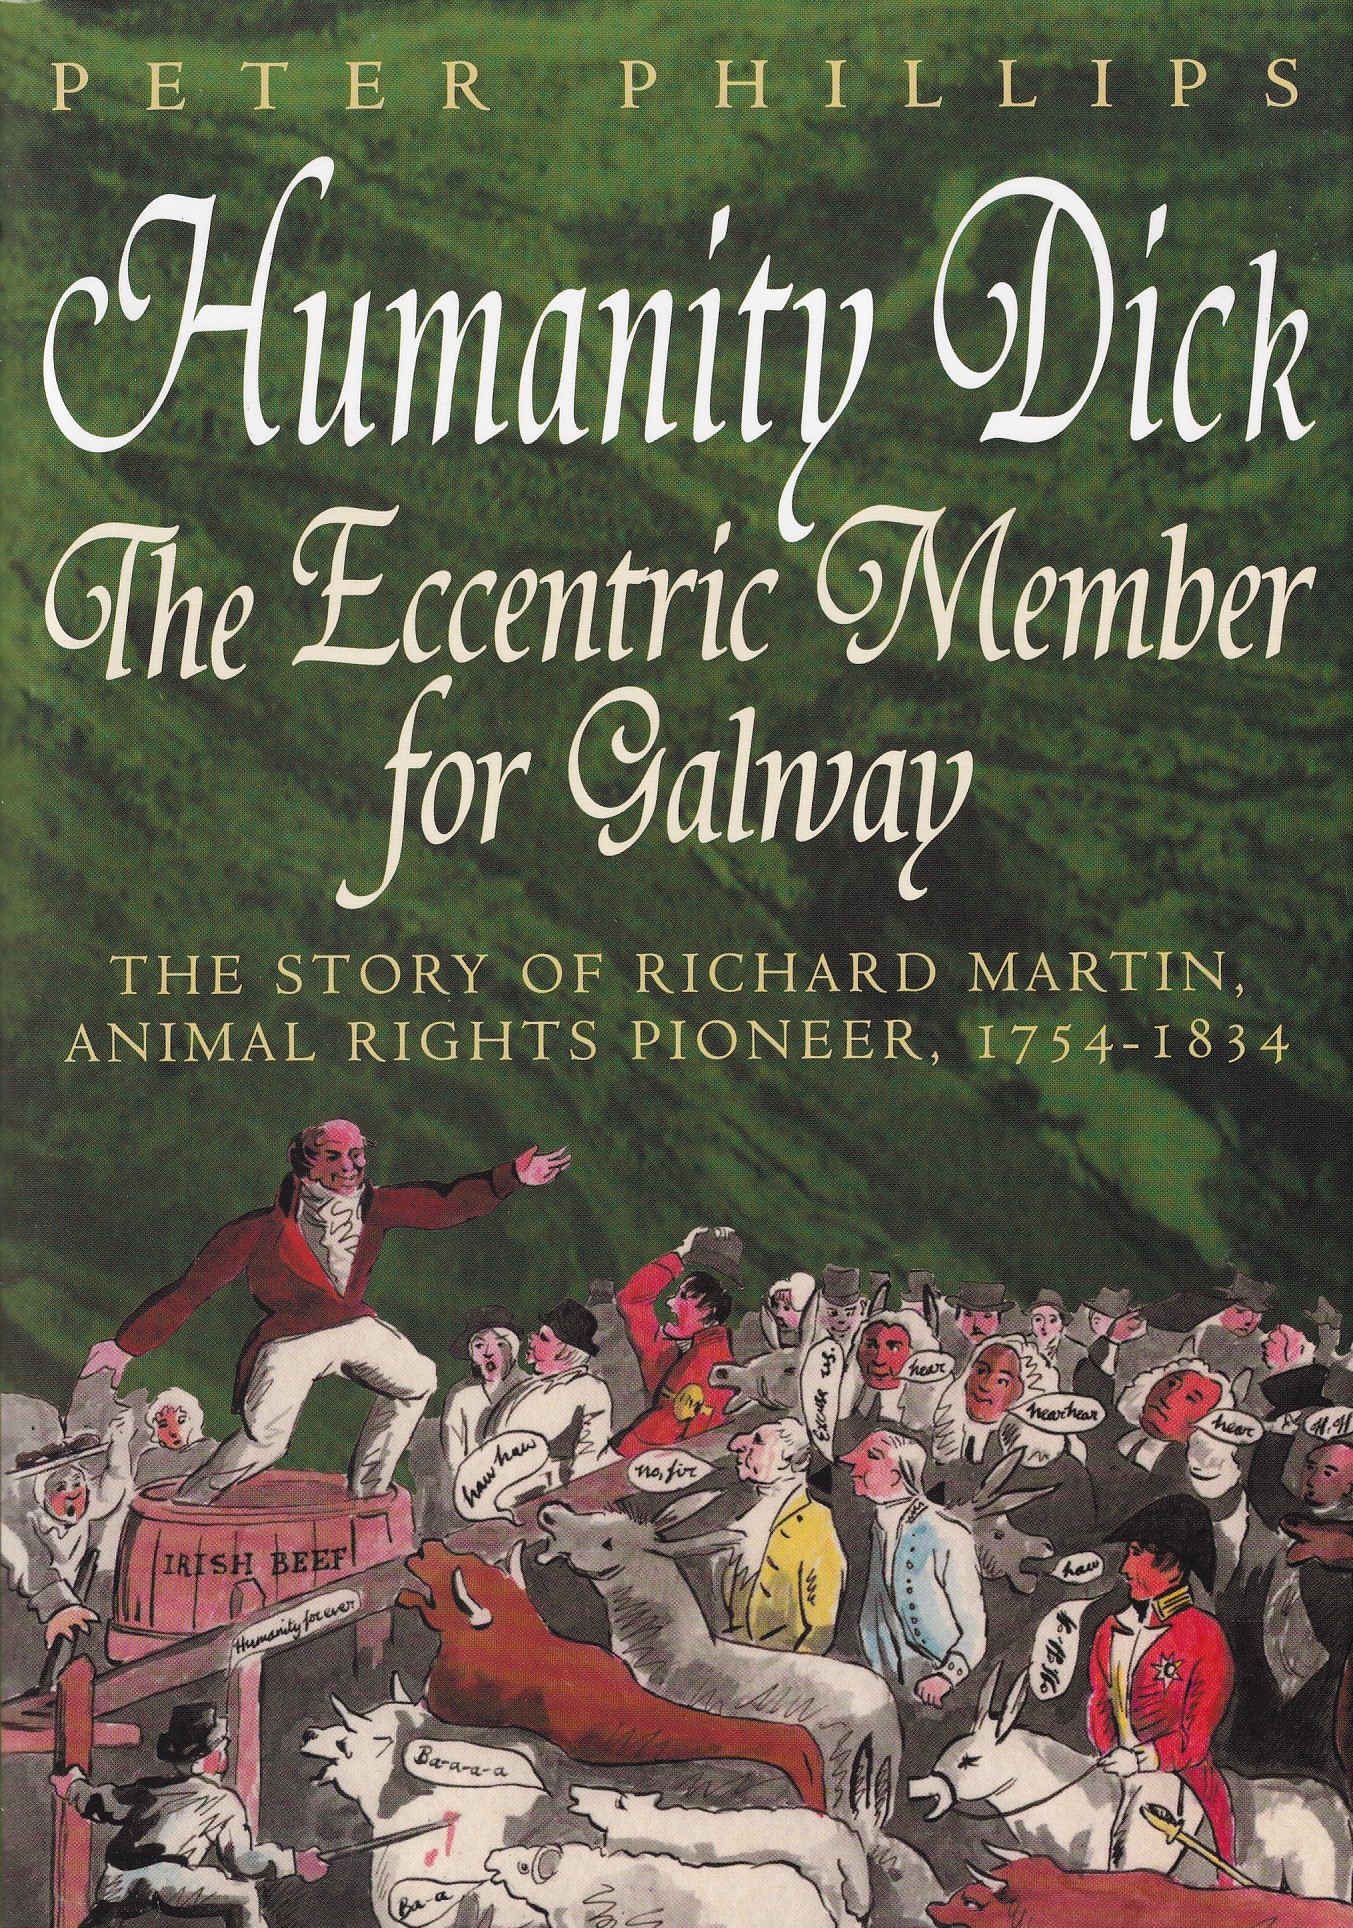 Humanity Dick: The Eccentric Member for Galway | Peter Phillips | Charlie Byrne's